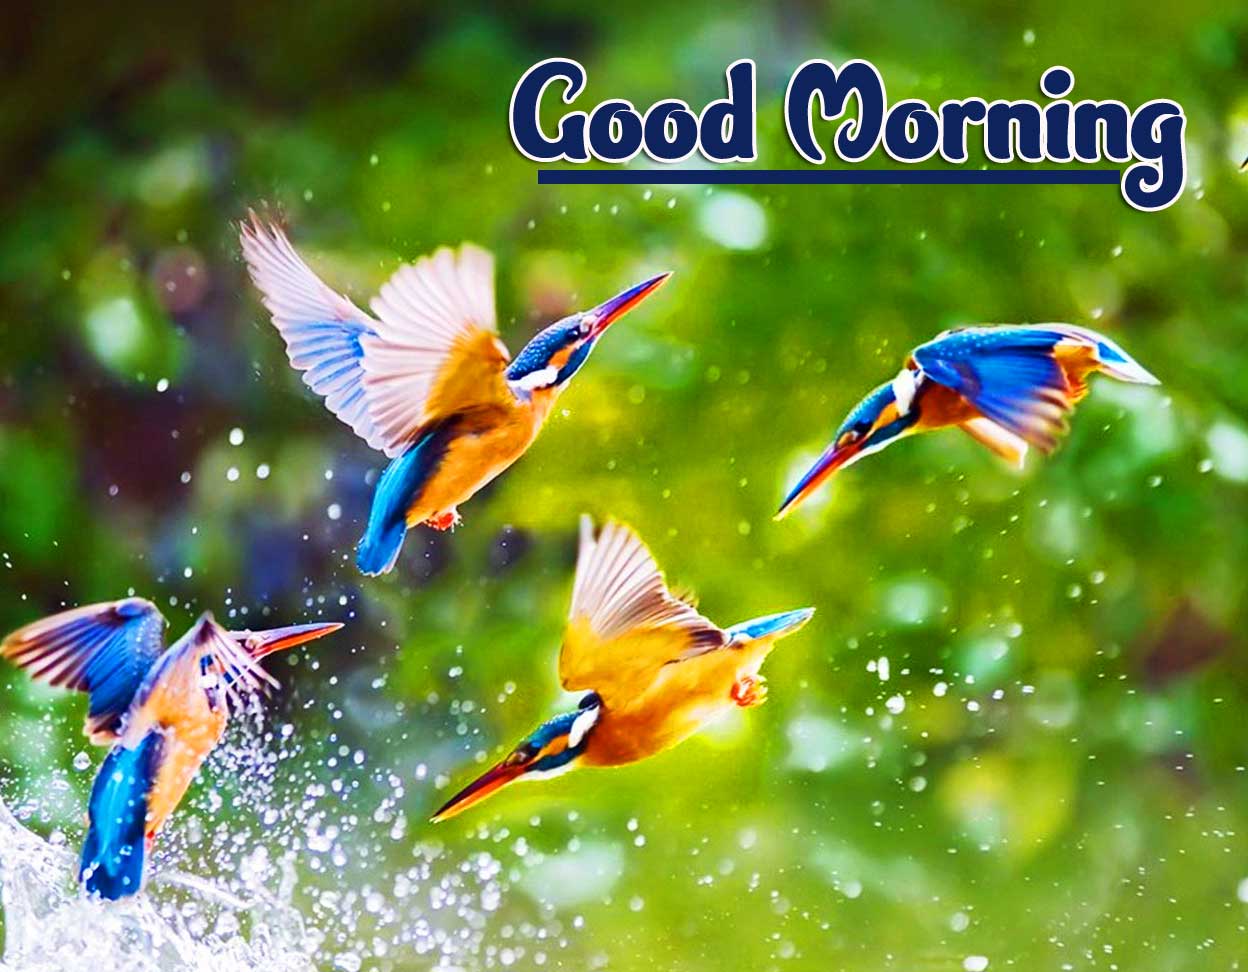 Best Latest Good Morning Images Pics For Facebook 